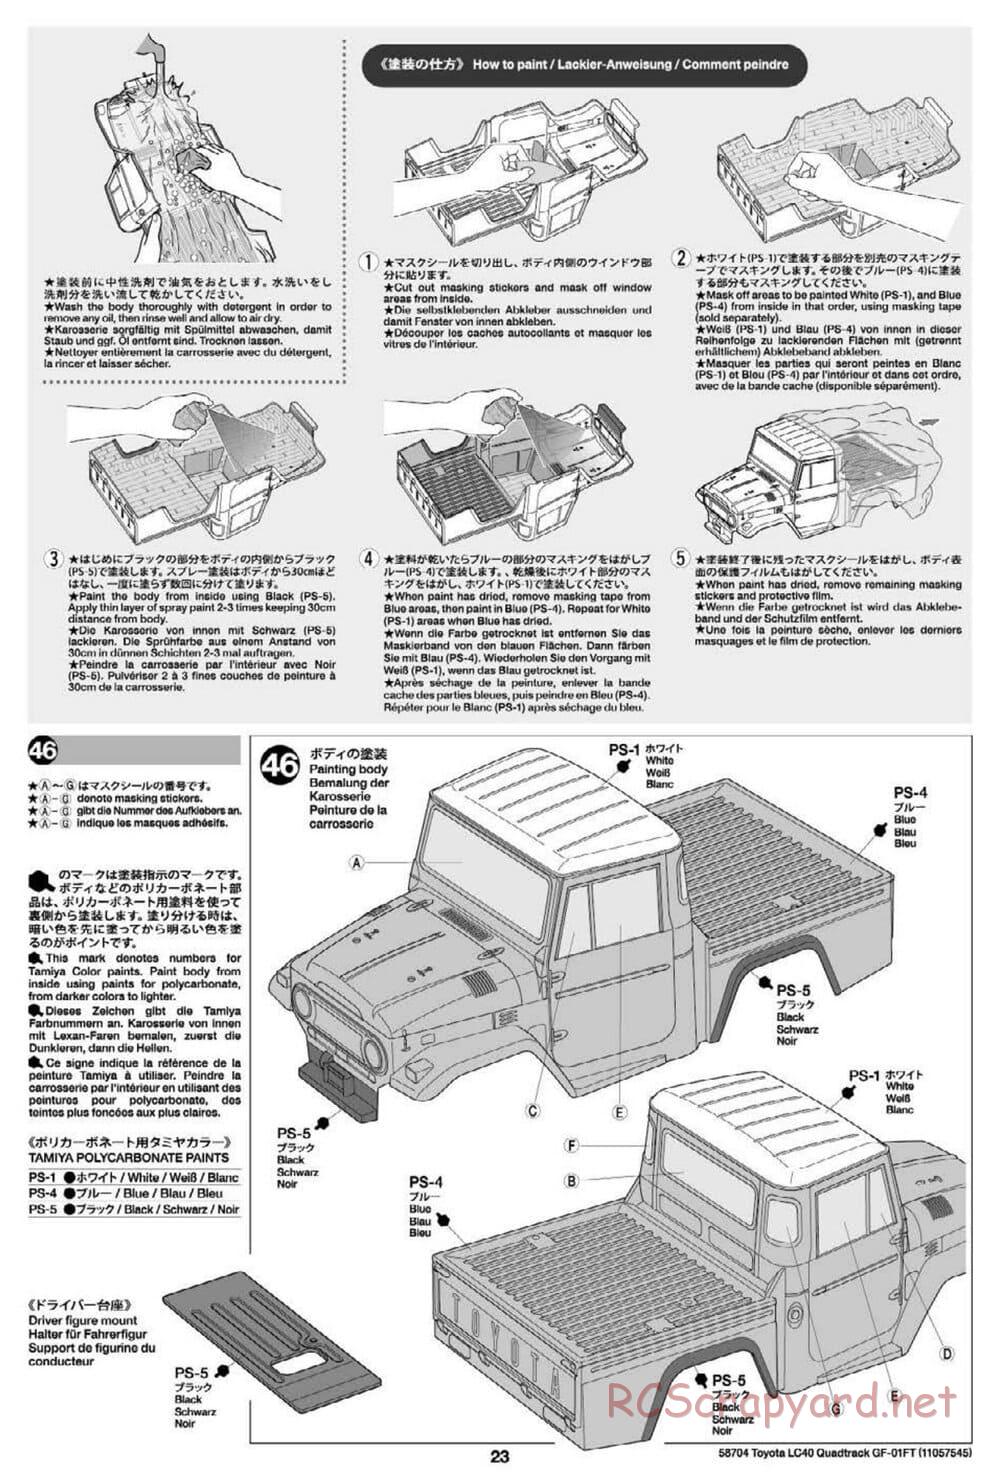 Tamiya - Toyota Land Cruiser 40 Pick-Up Quadtrack - GF-01FT Chassis - Manual - Page 23